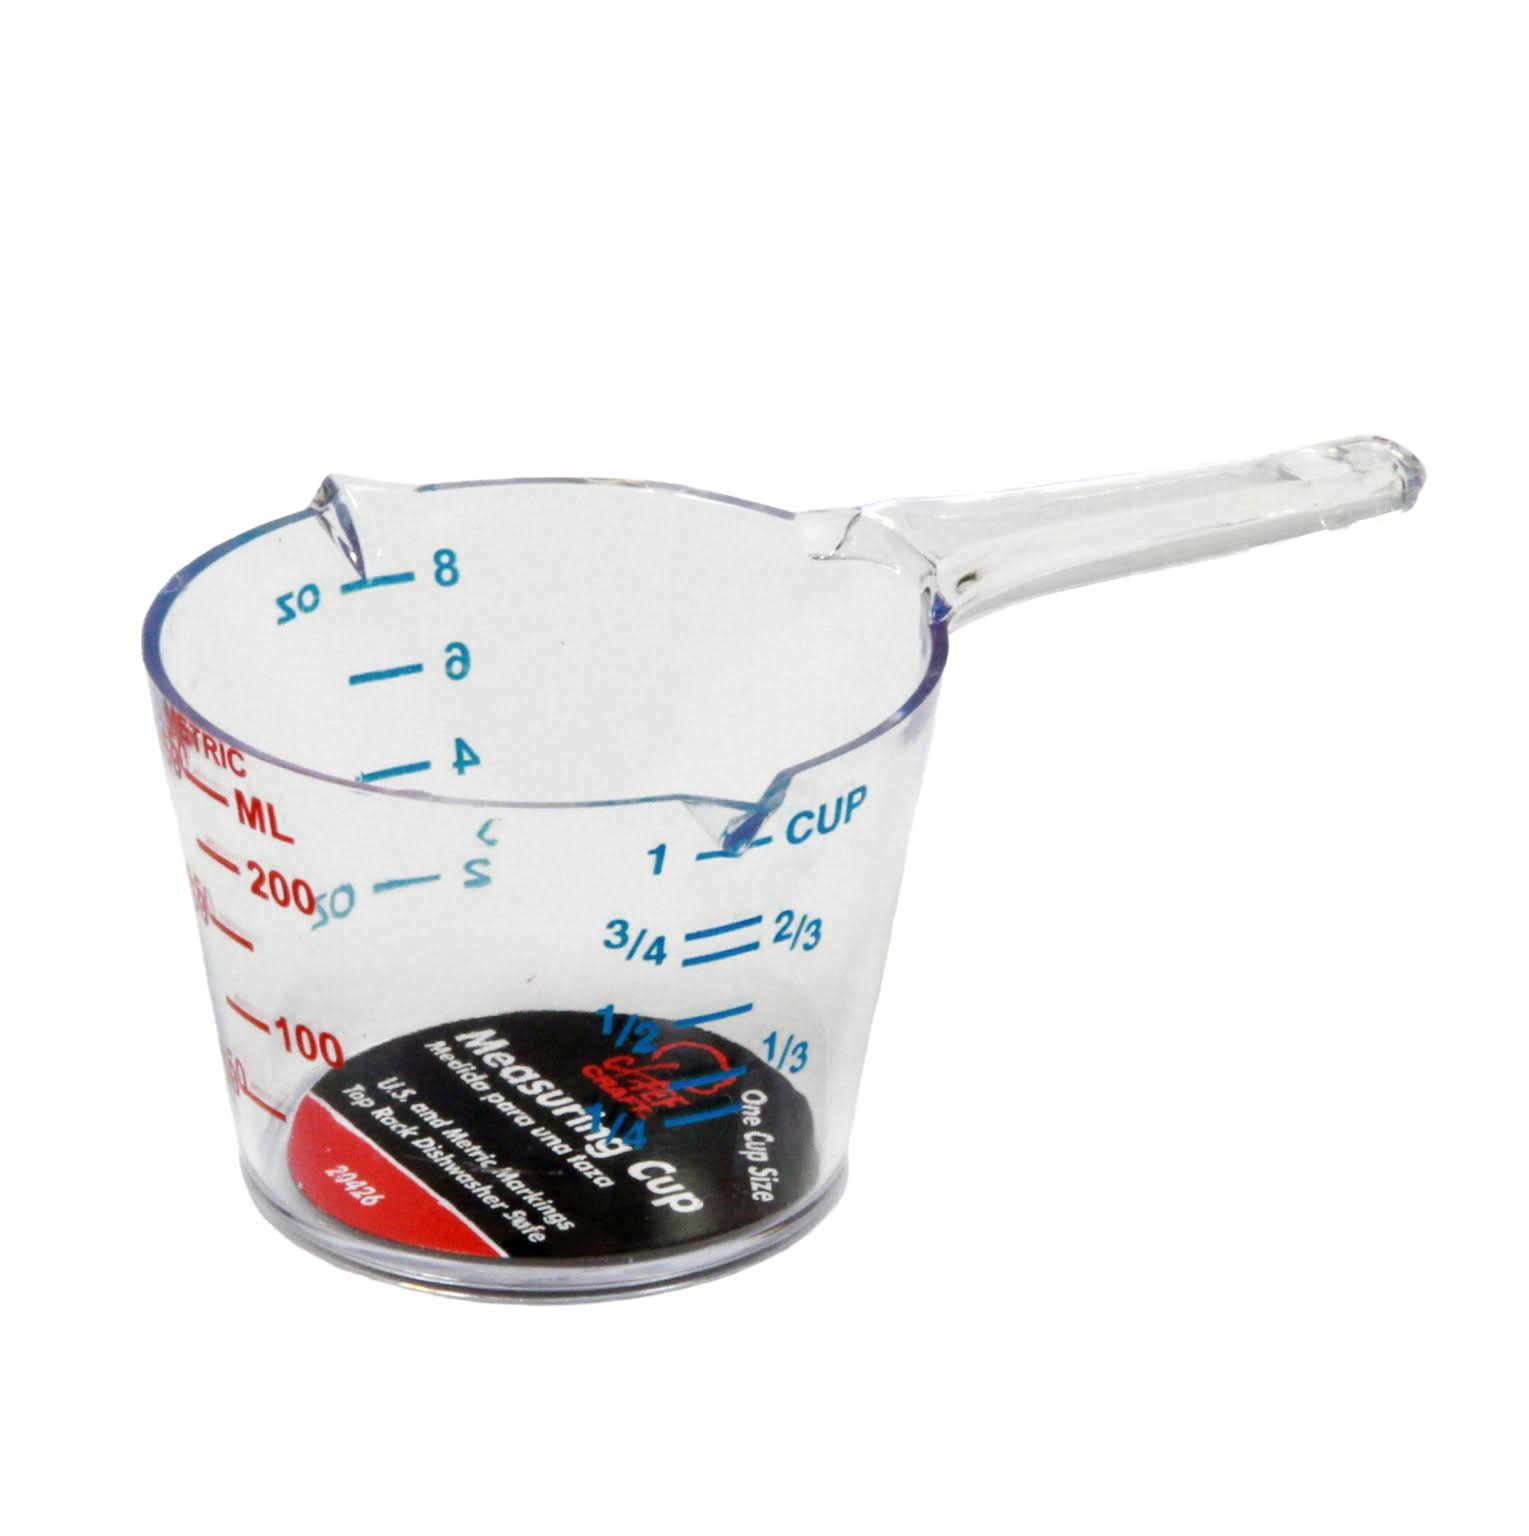 Chef Craft 20426 Measuring Cup - 1 Cup